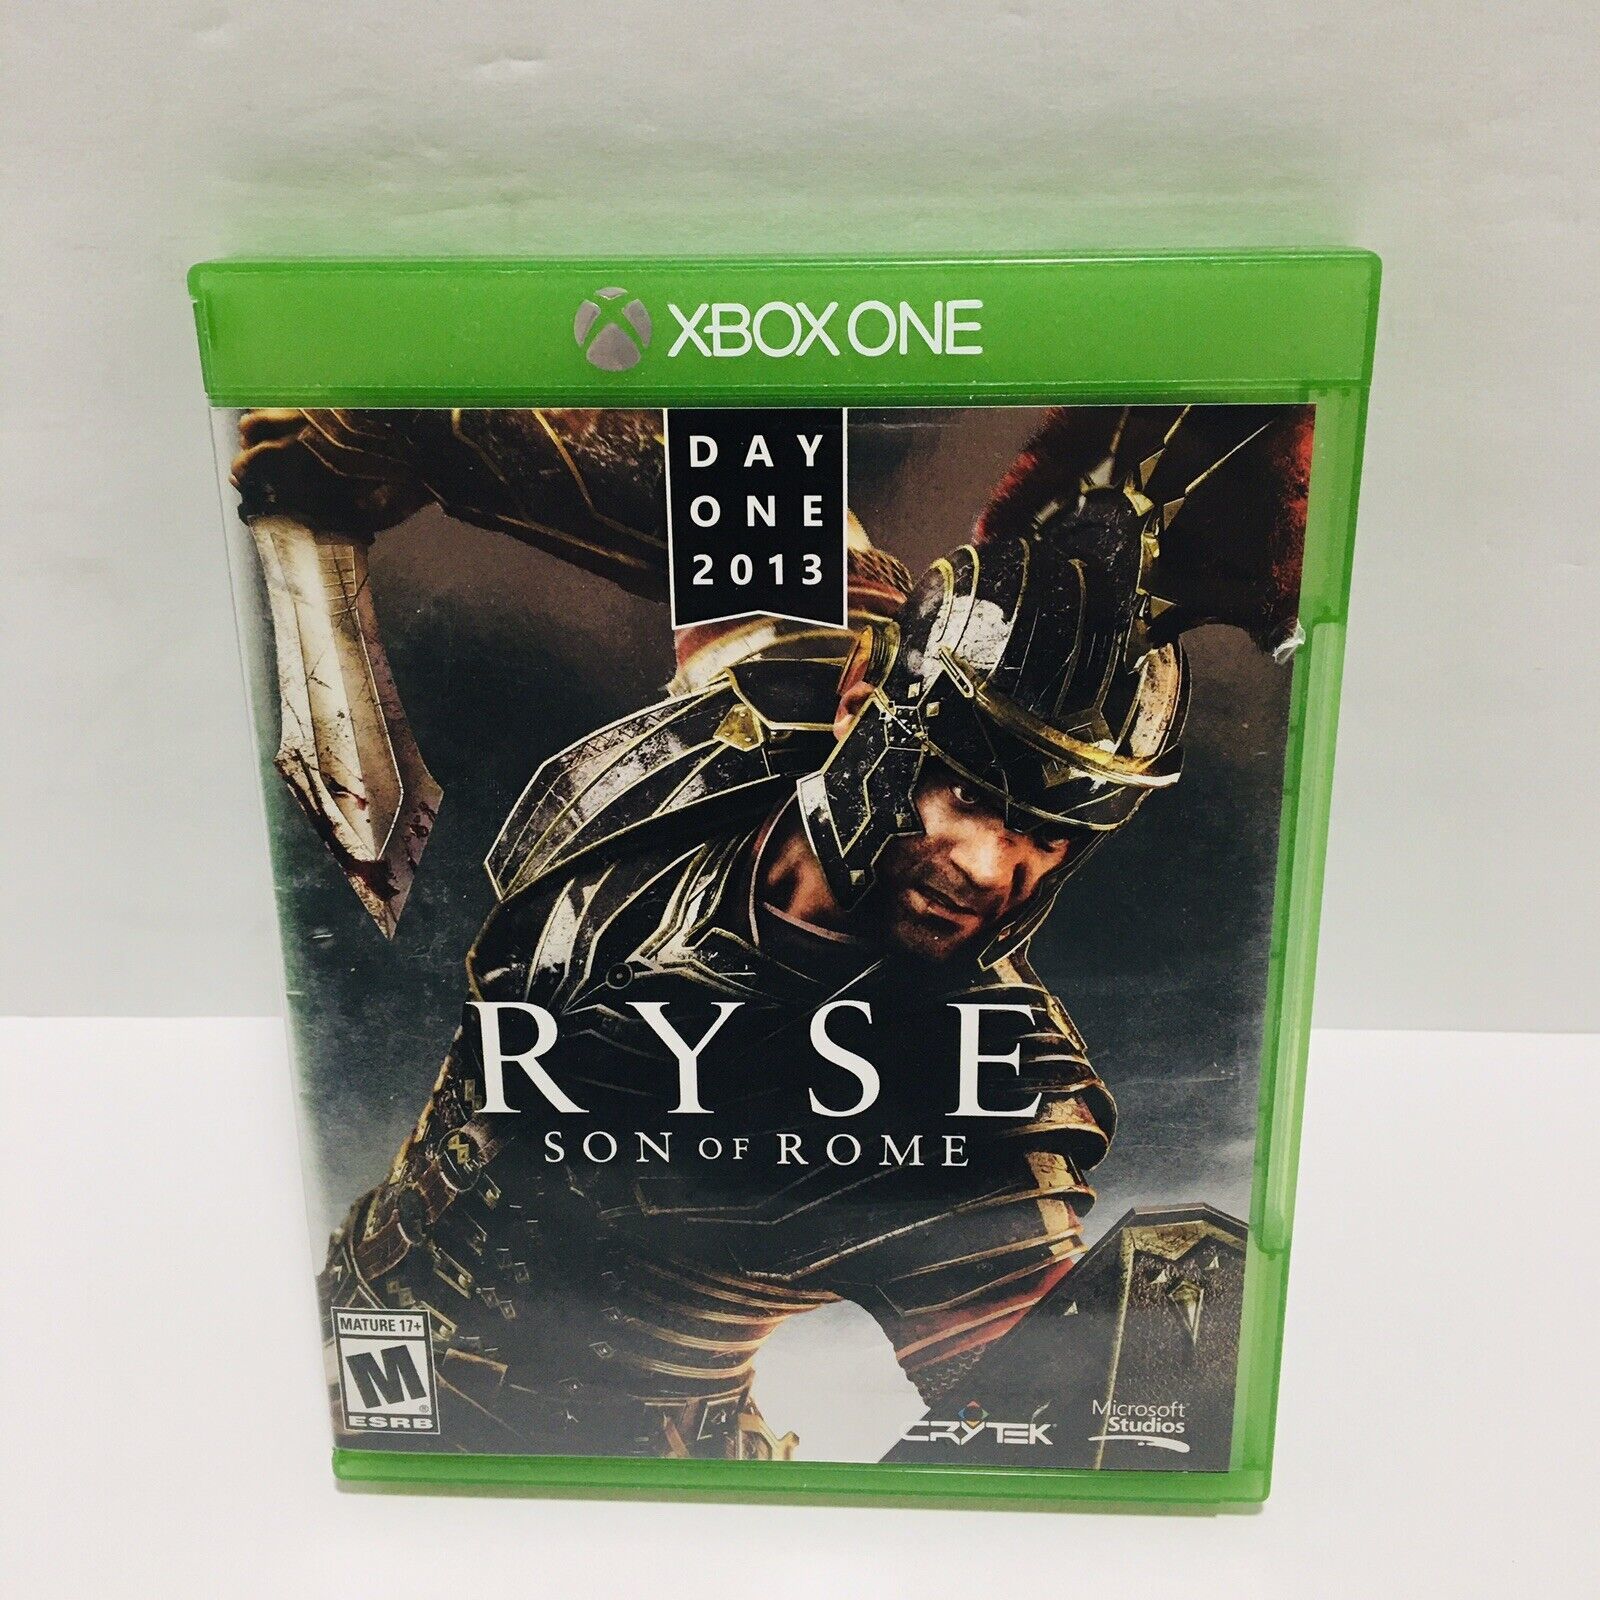 Primary image for Ryse: Son of Rome - Xbox One - TESTED EUC